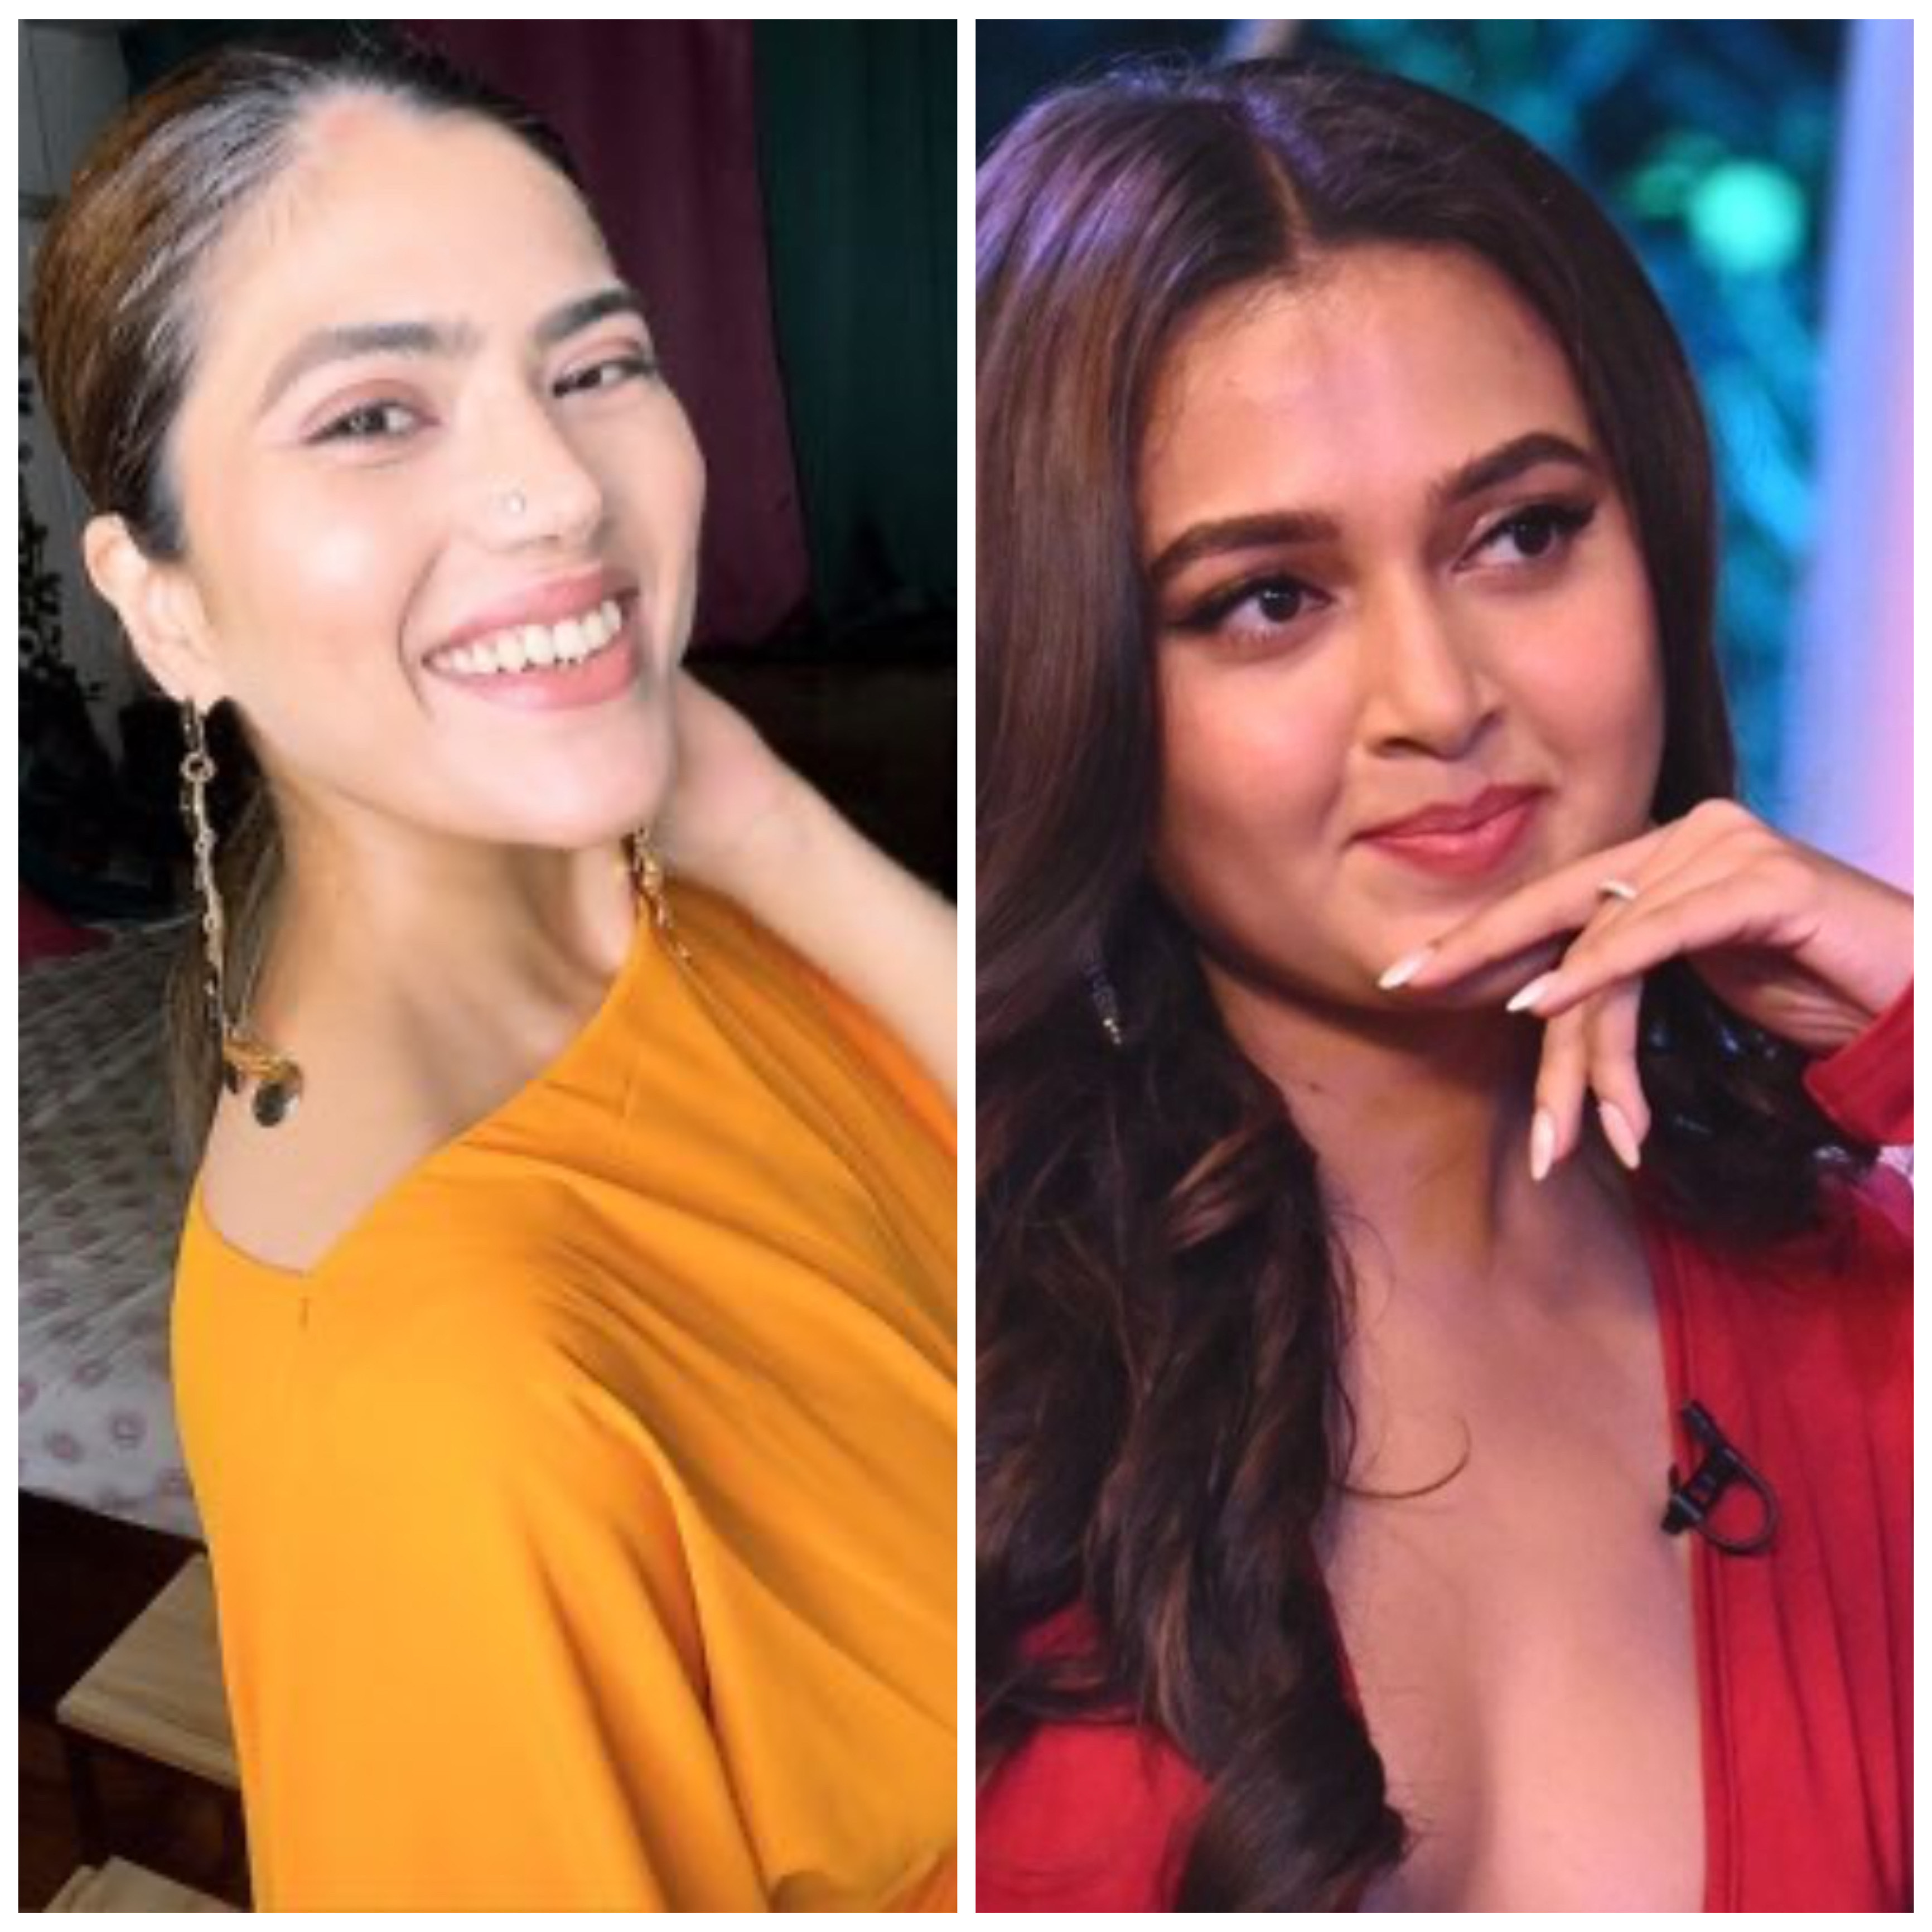 Neha Dinesh Anand receives essential advice from Tejasswi Prakash after her heartbreak on Temptation Island; says, “The more time you waste in wrong assumptions, the more it will hurt.”